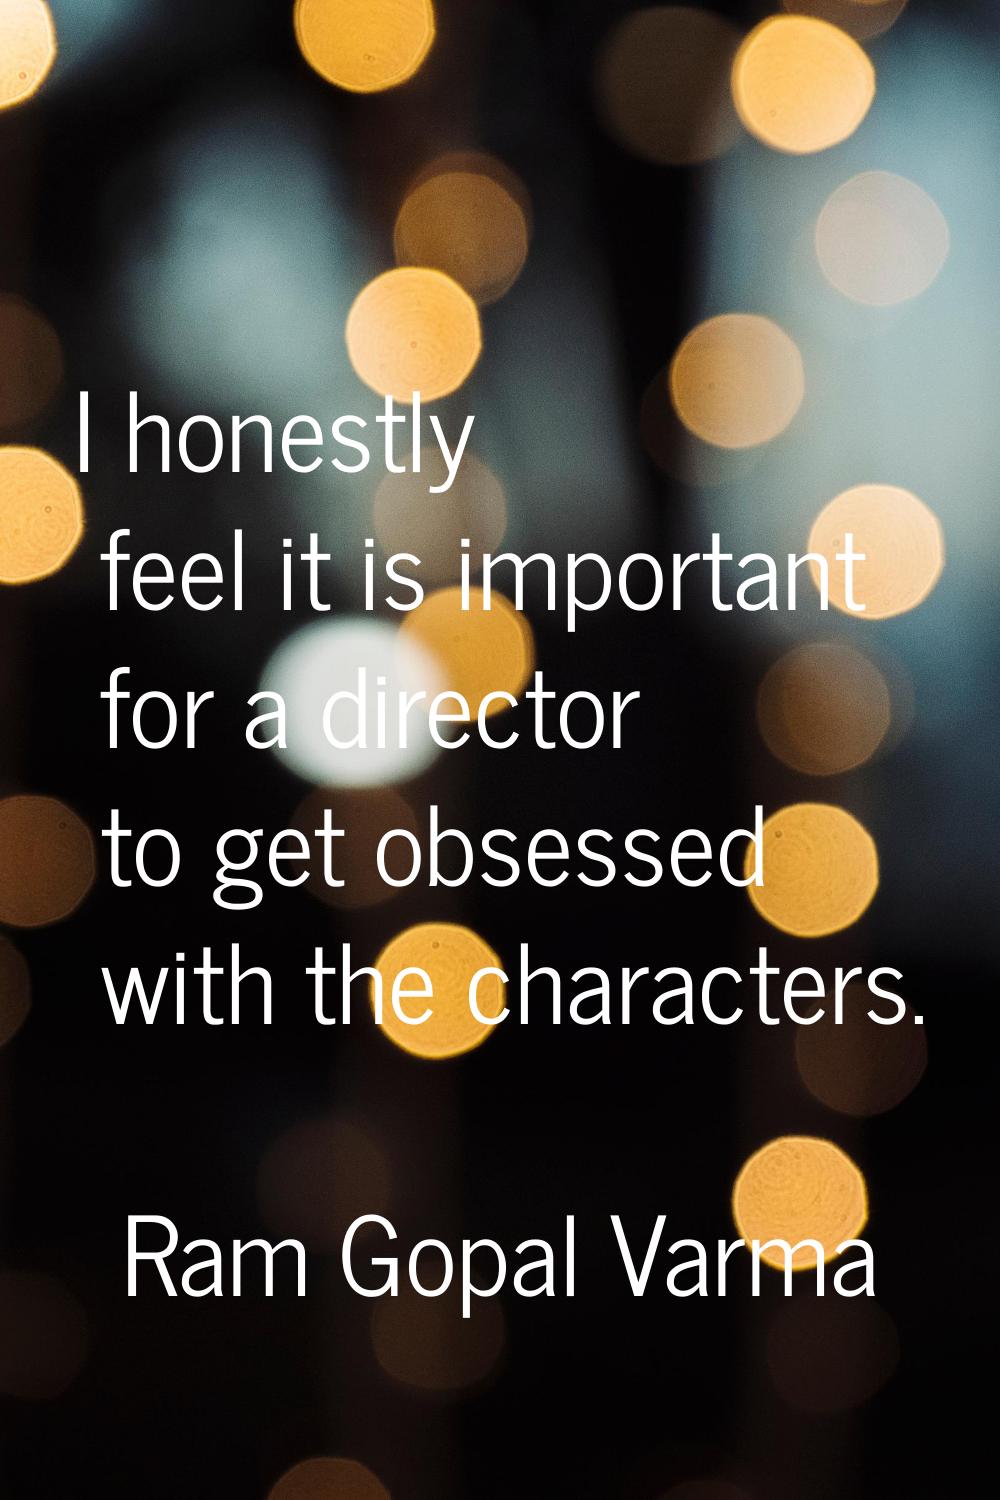 I honestly feel it is important for a director to get obsessed with the characters.